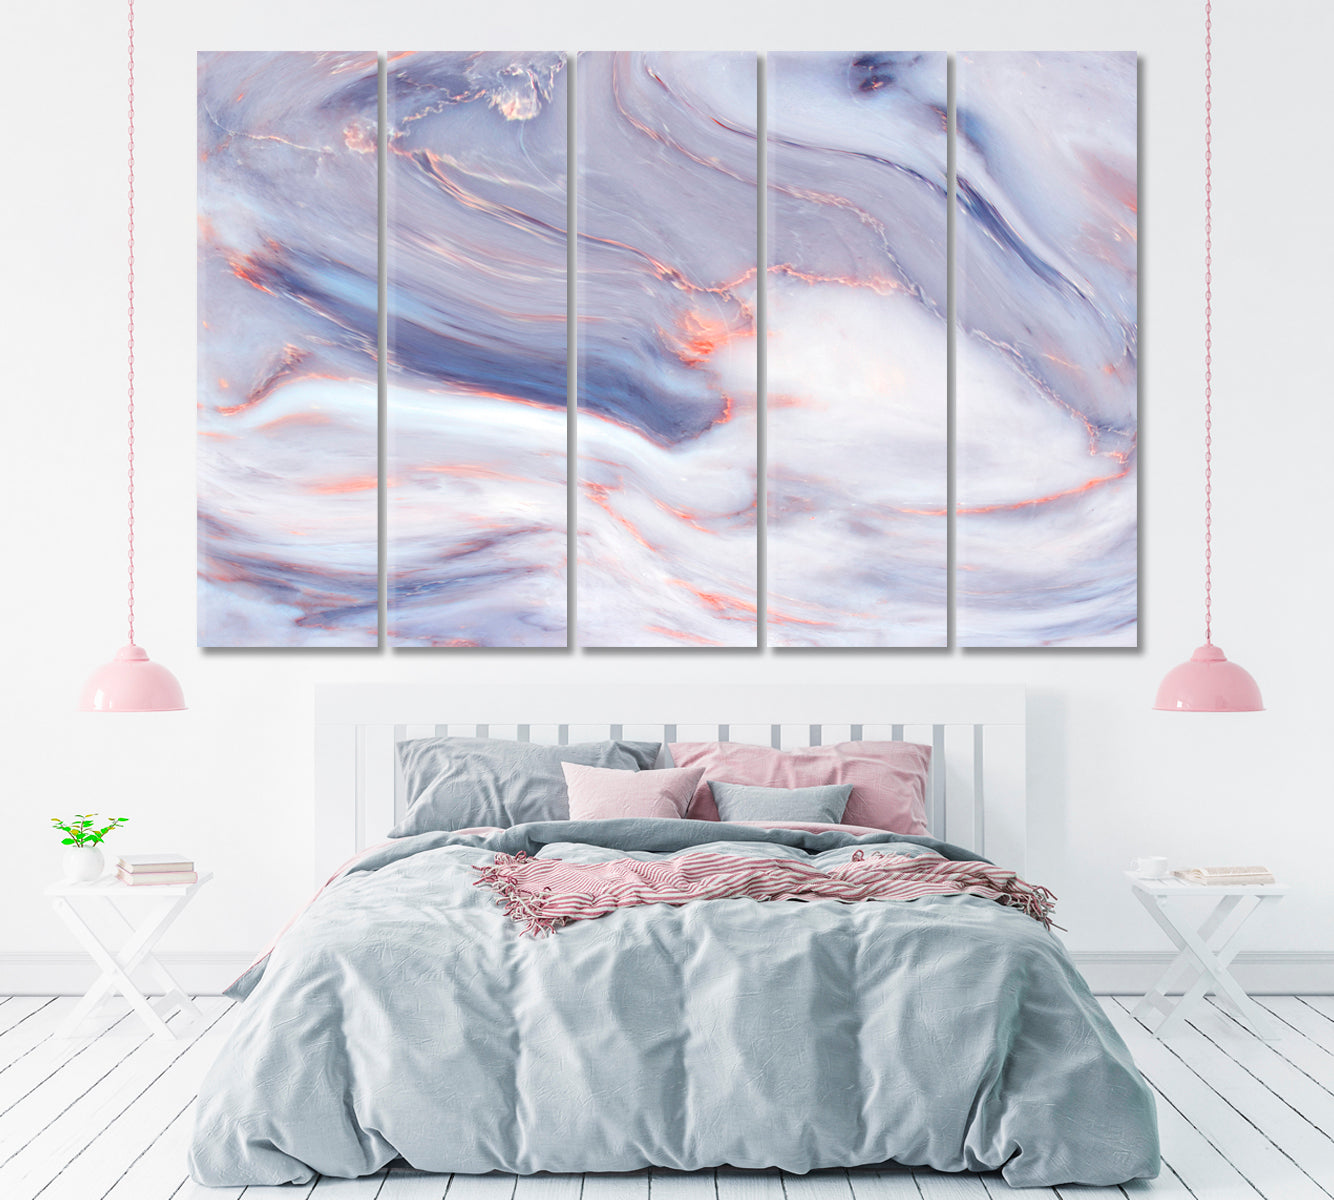 Blue Marble with Golden Veins Canvas Print ArtLexy 5 Panels 36"x24" inches 